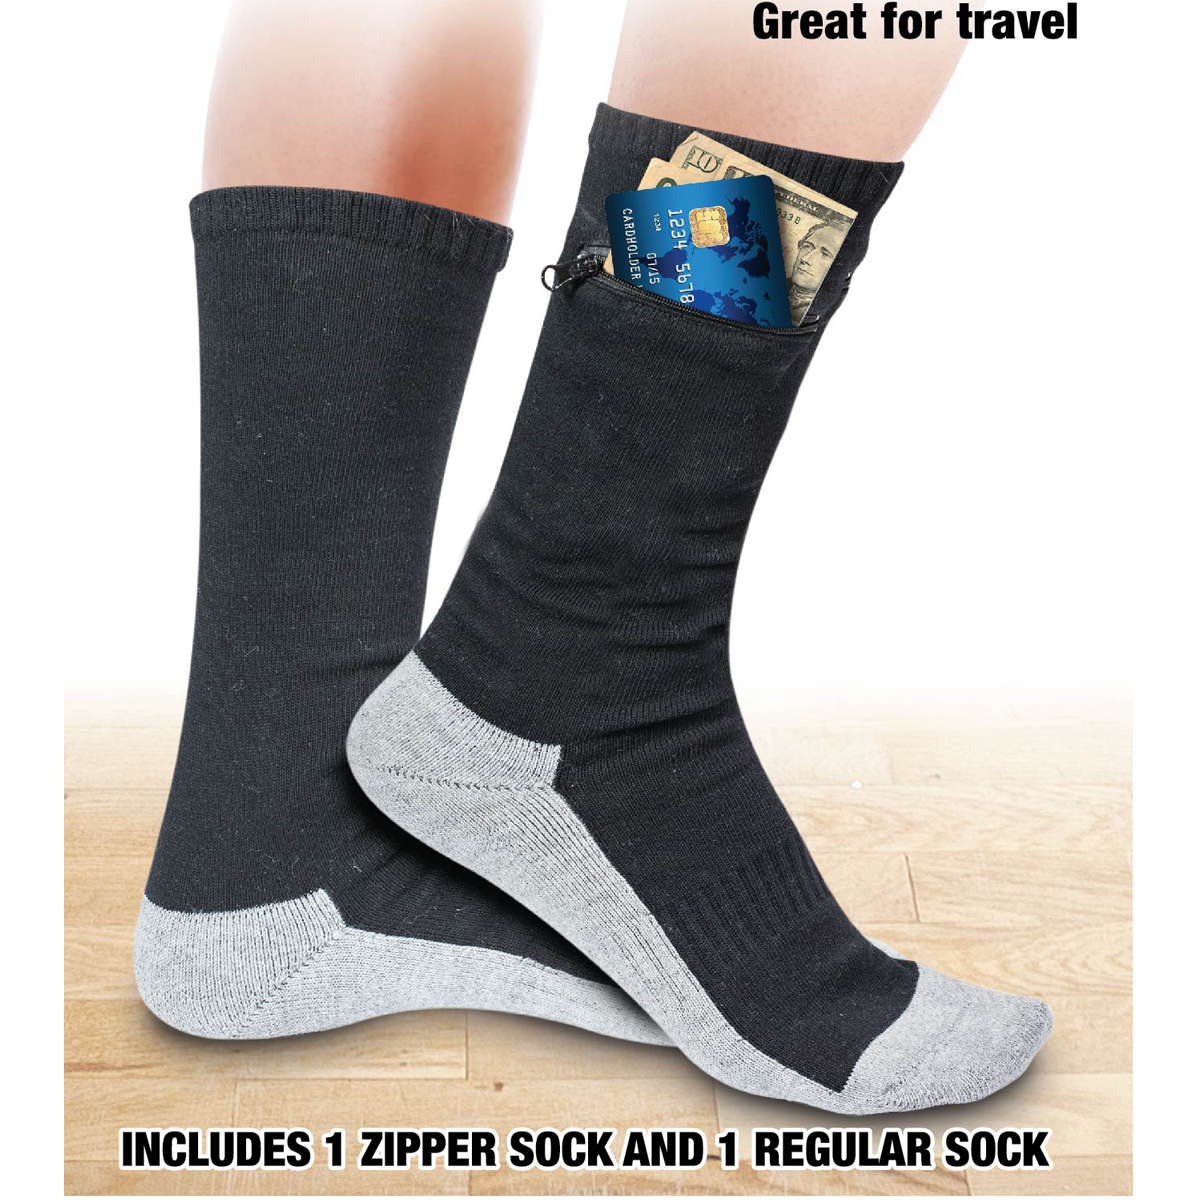 Pocket Socks: The Ultimate Travel Security Socks with Zippered Pocket MMi Products UK